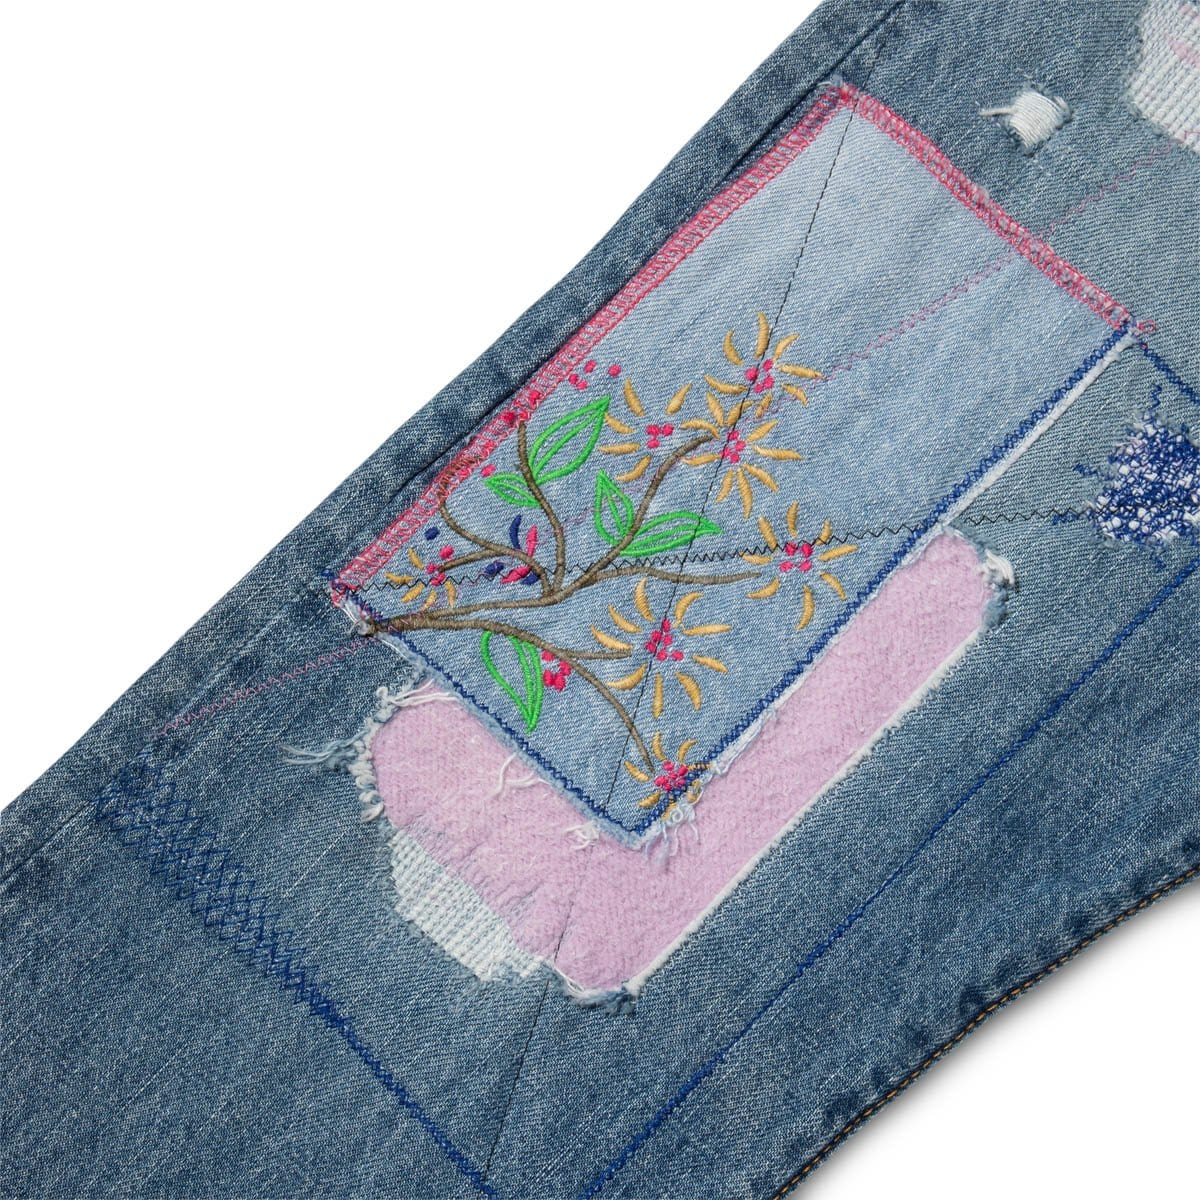 OKABILLY Straight-Leg Patchwork Embroidered Jeans